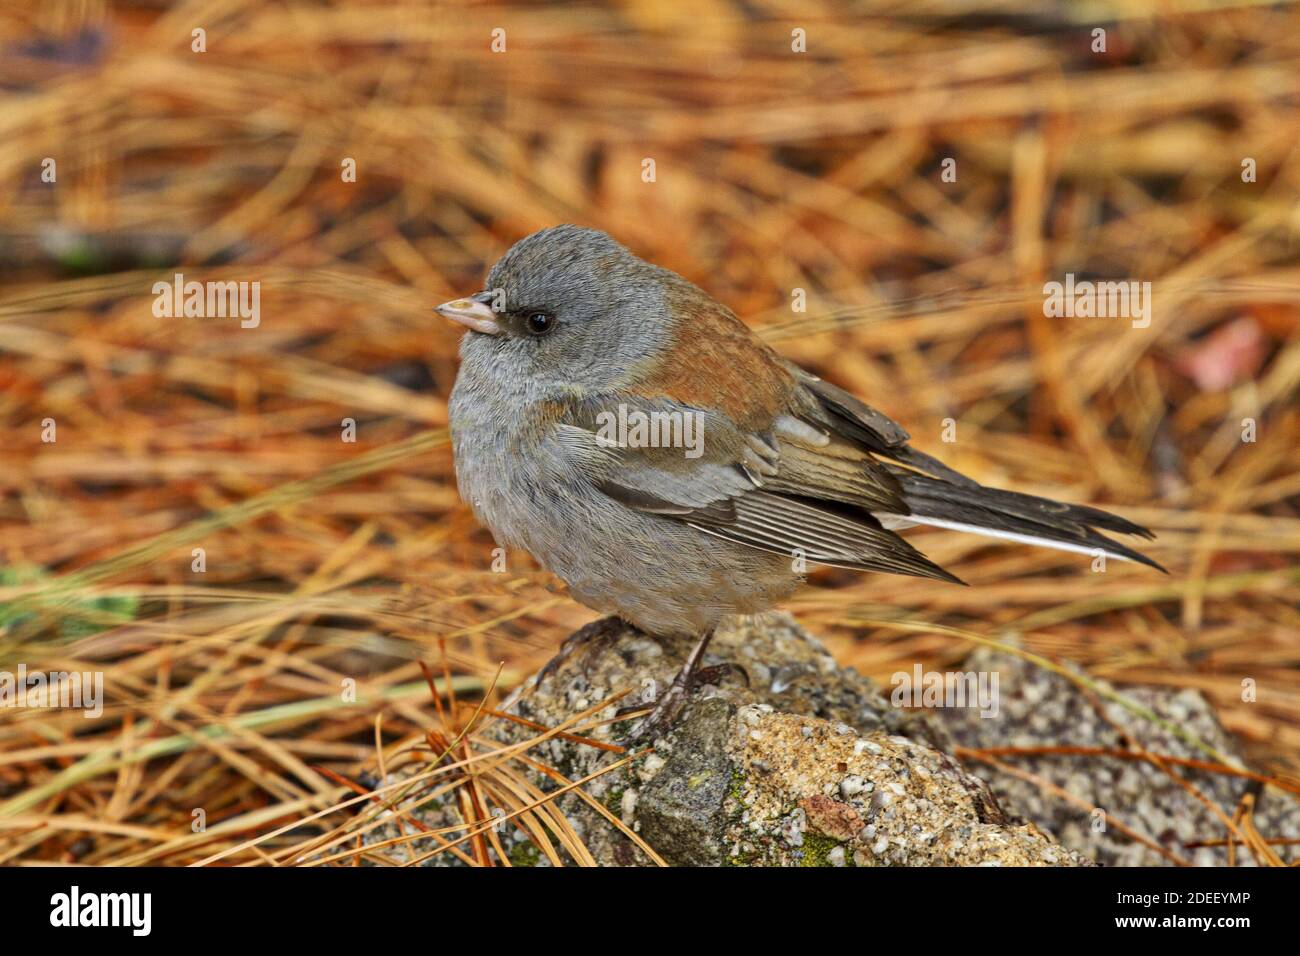 Dark eyed junco stands perched on rock on a forest floor covered with autumn season dried pine needles Stock Photo